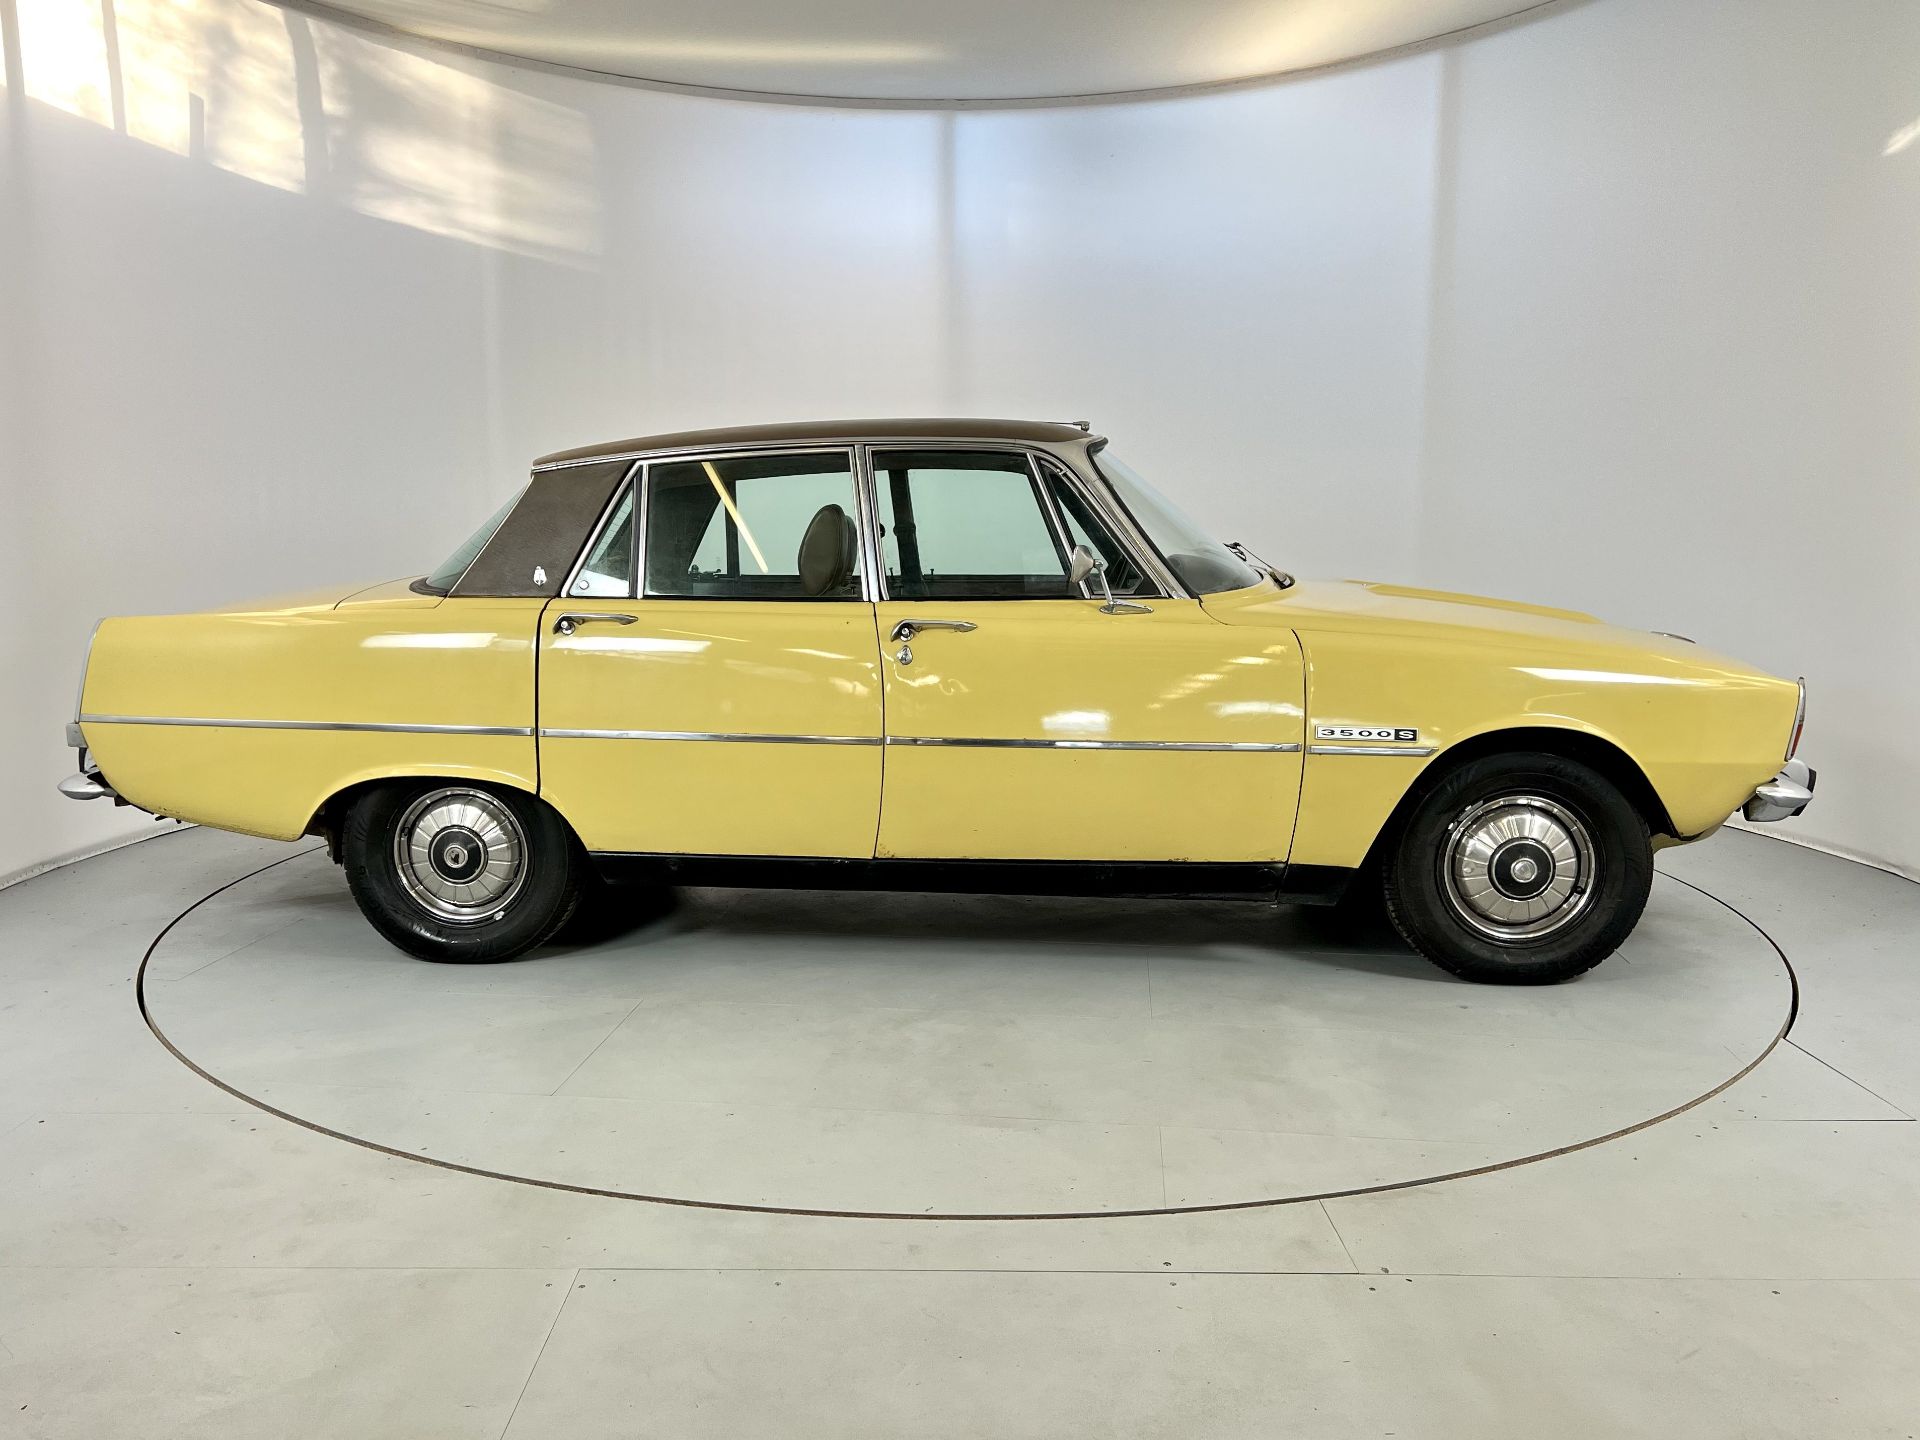 Rover 3500 S - Image 11 of 30